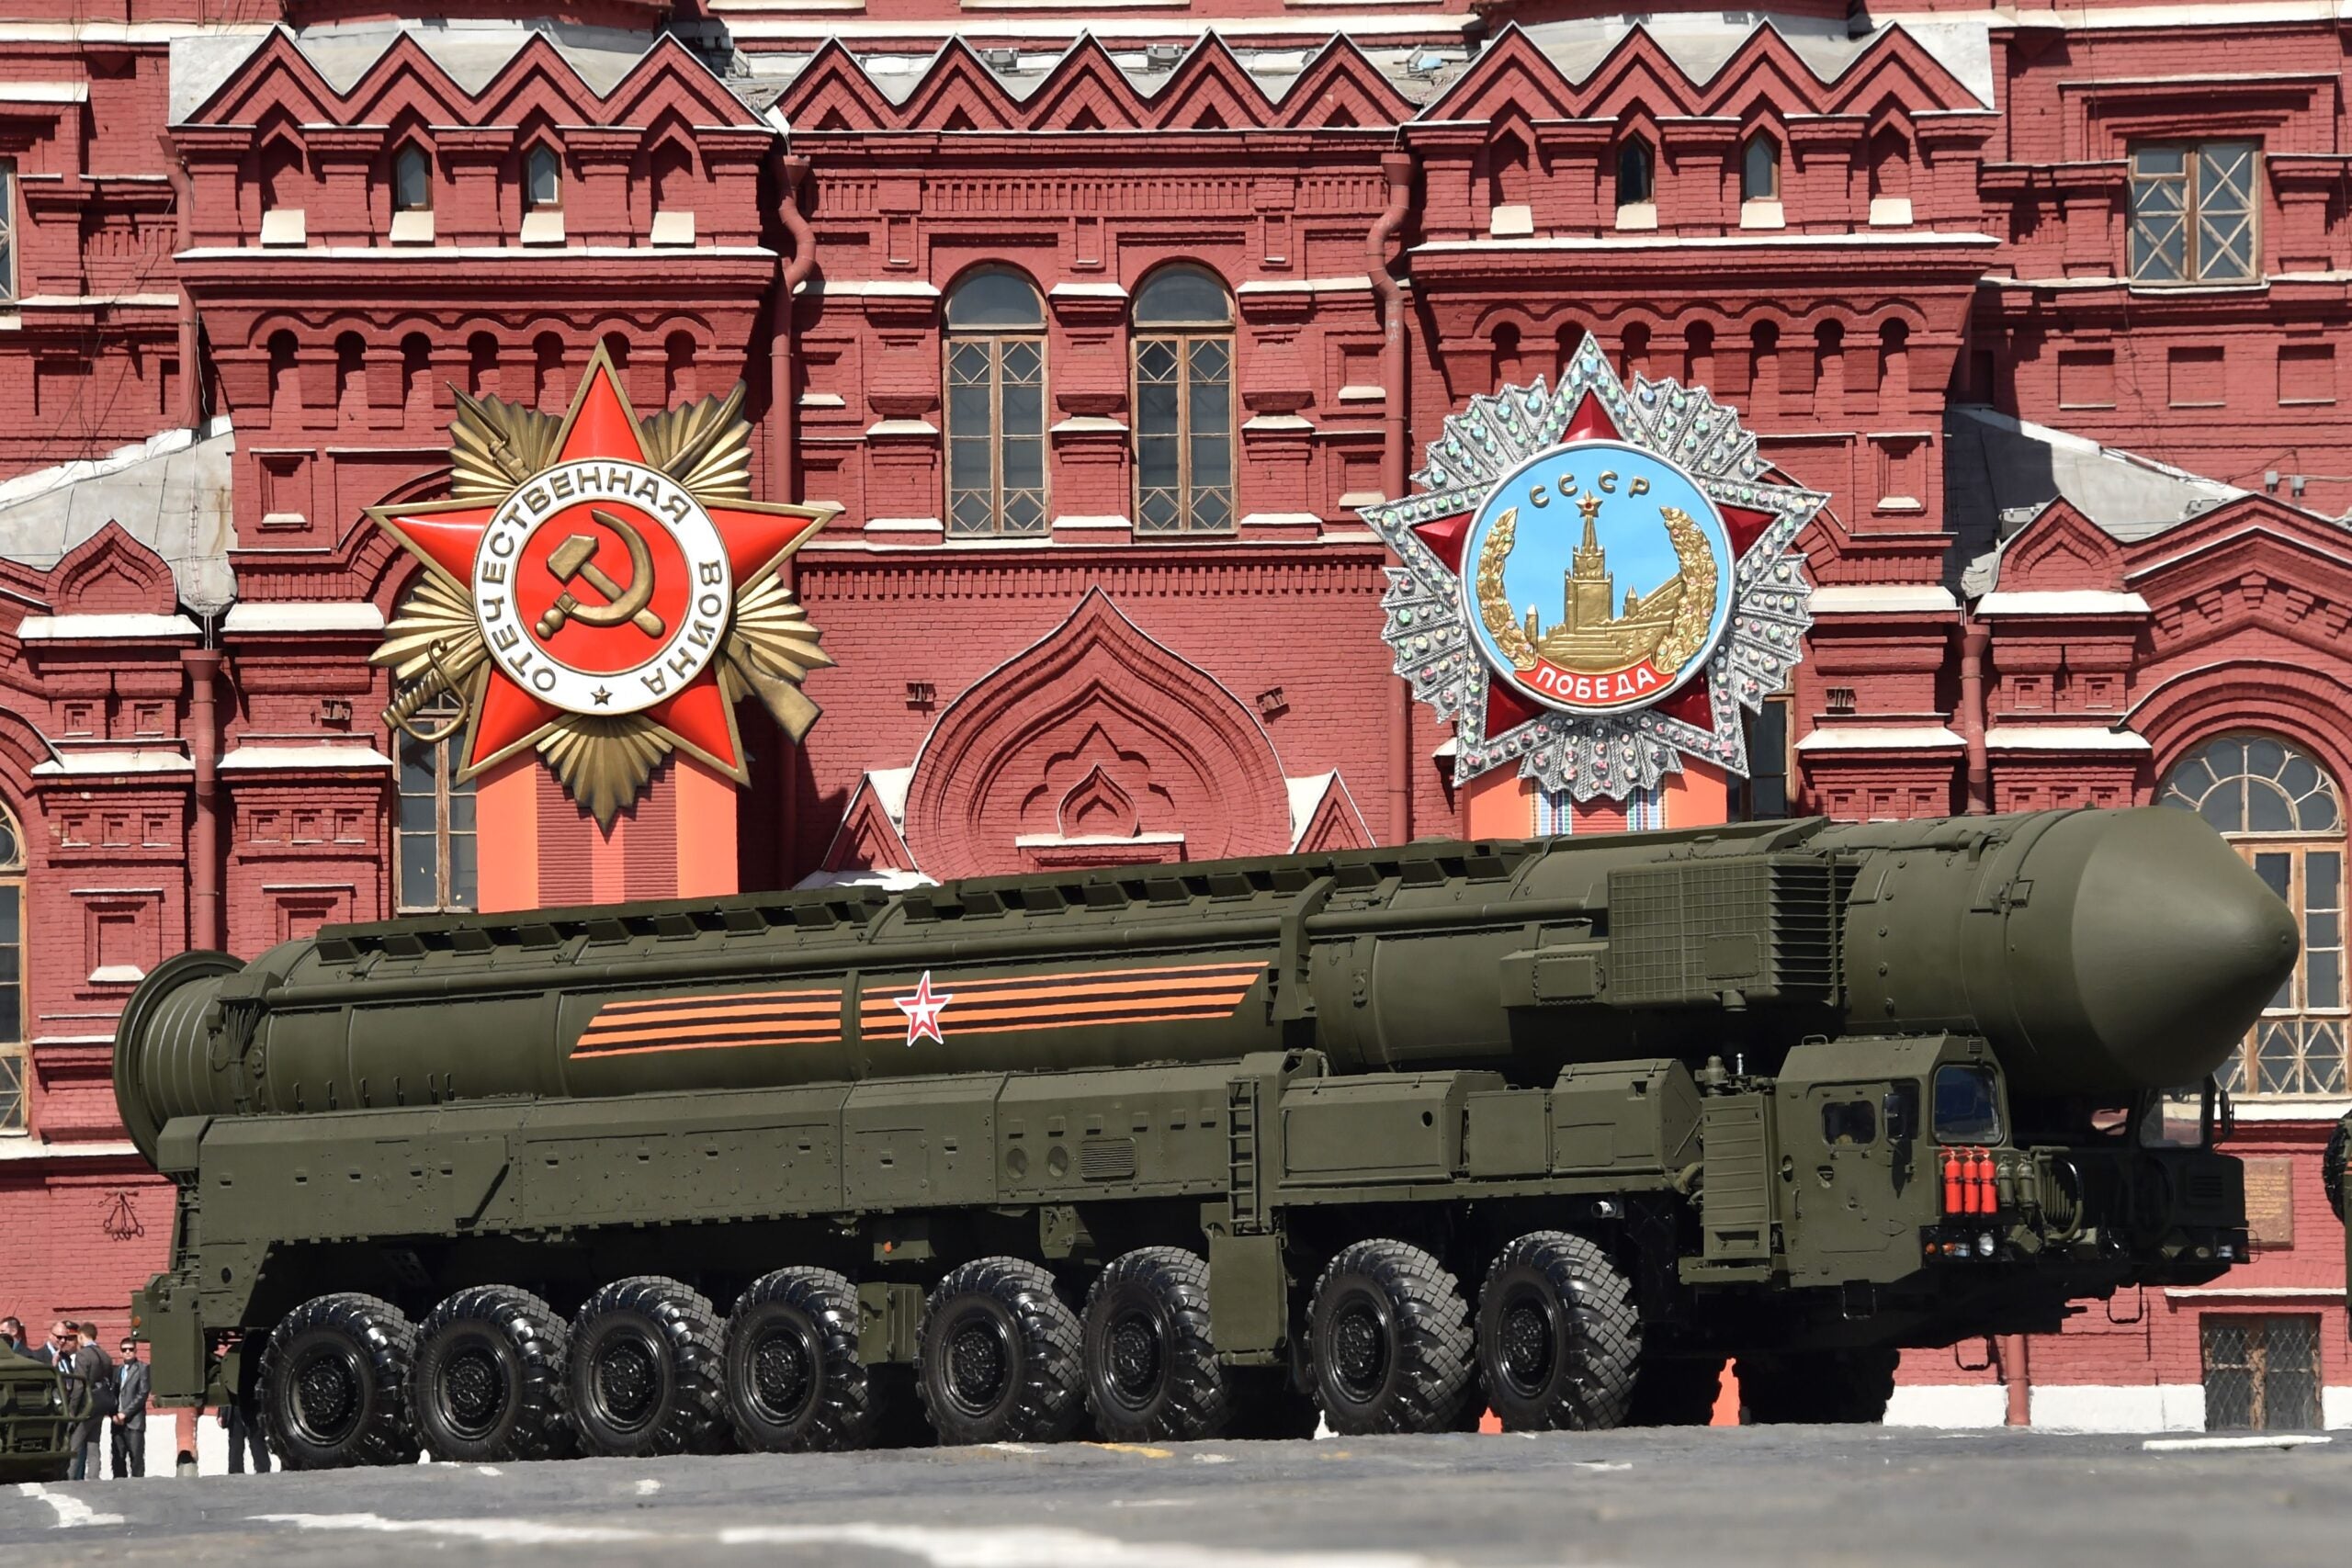 A Russian Yars RS-24 intercontinental ballistic missile system drives through Red Square in Moscow, on May 7, 2015, during a rehearsal for the Victory Day military parade. Russia will celebrate the 70th anniversary of the 1945 victory over Nazi Germany on May 9. AFP PHOTO / KIRILL KUDRYAVTSEV (Photo by Kirill KUDRYAVTSEV / AFP) (Photo by KIRILL KUDRYAVTSEV/AFP via Getty Images)